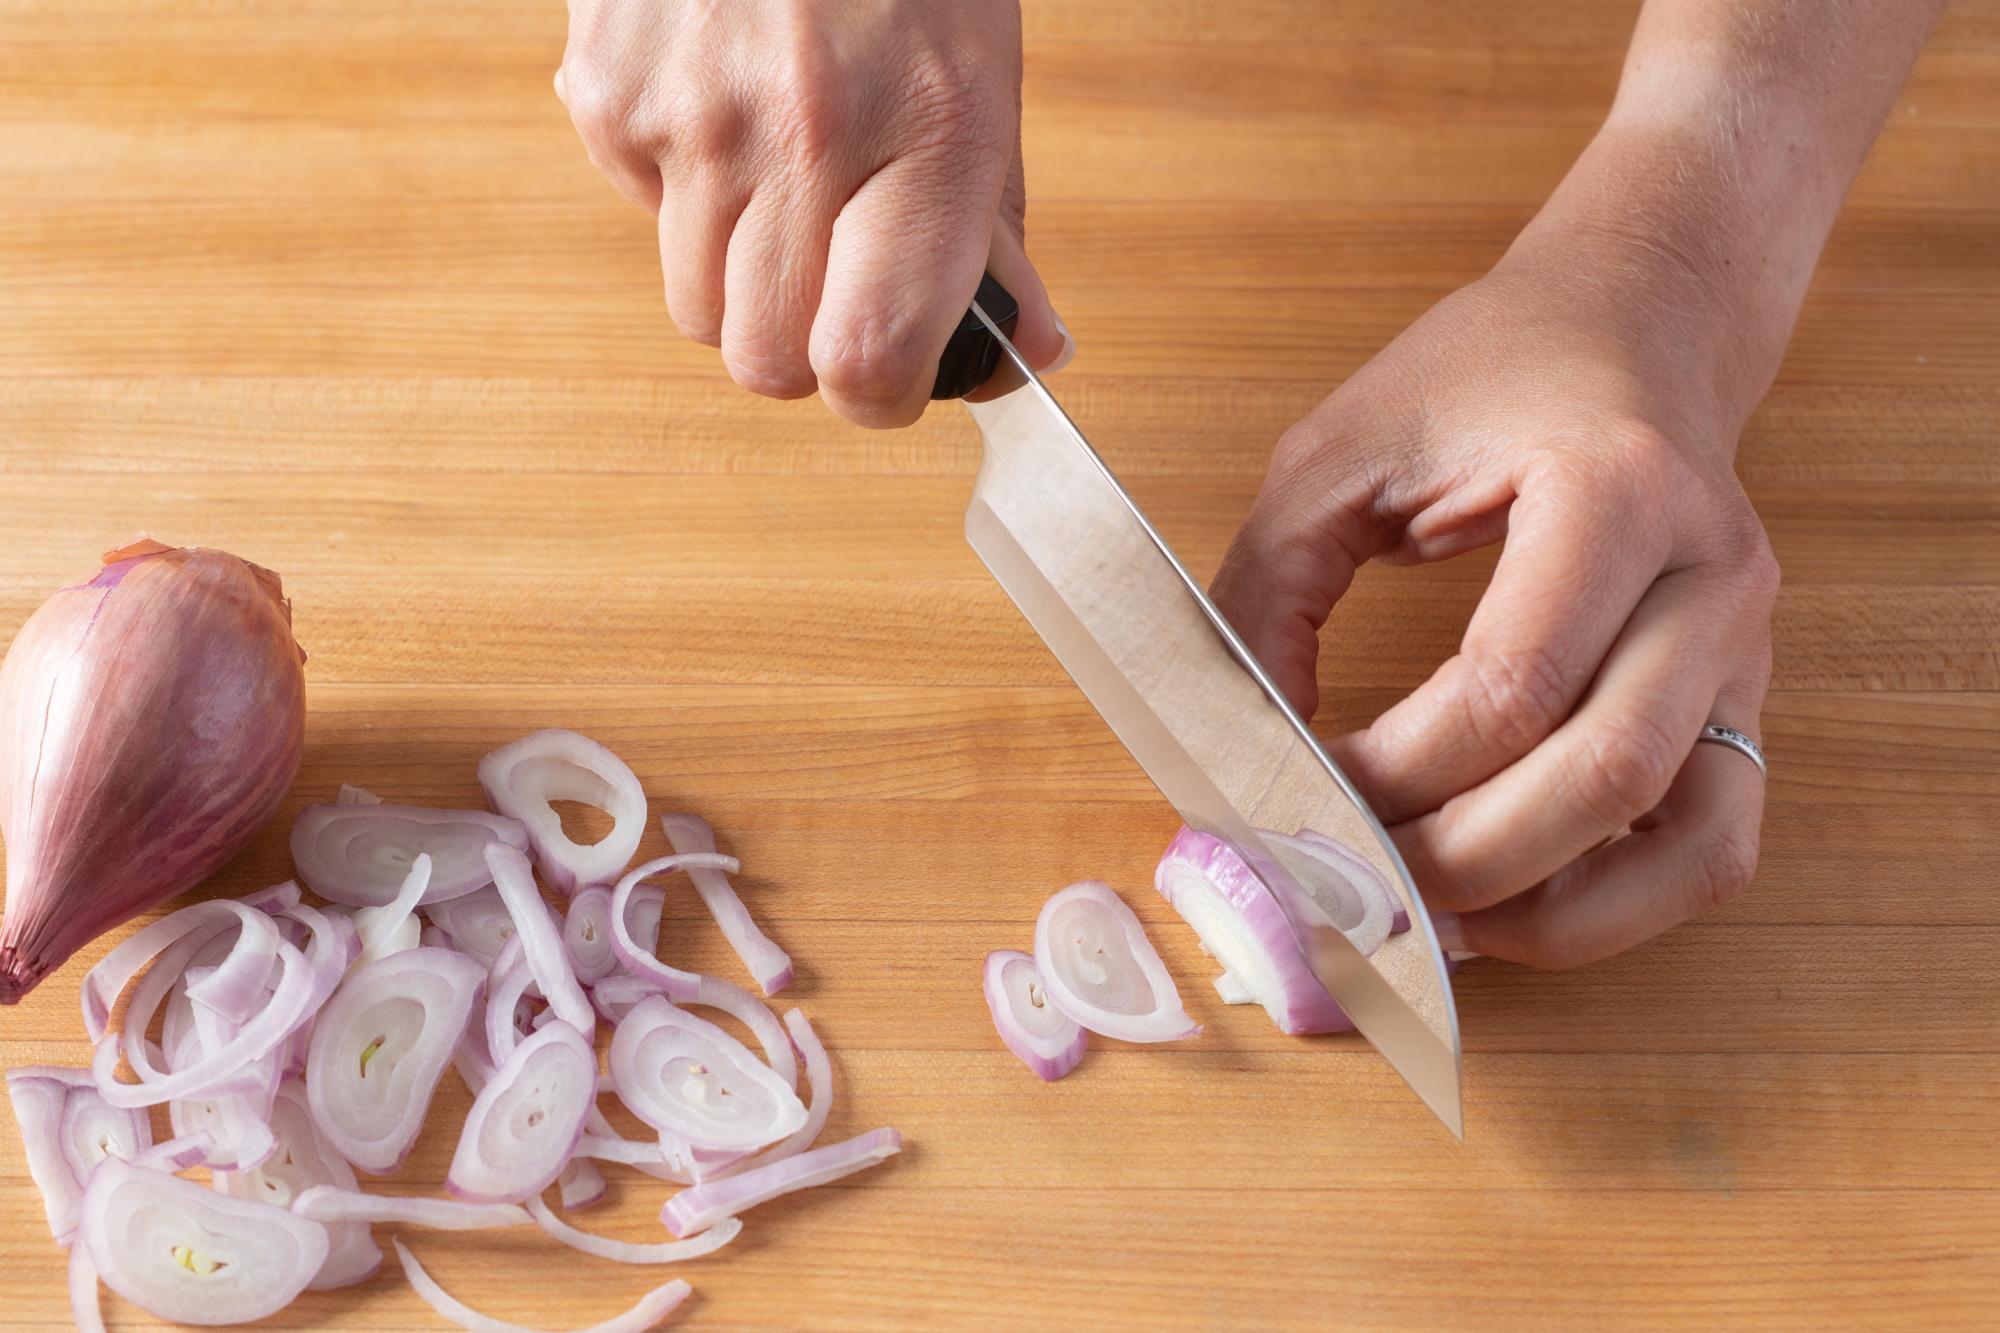 The Petite Santoku is perfect for thinly slicing the onion.